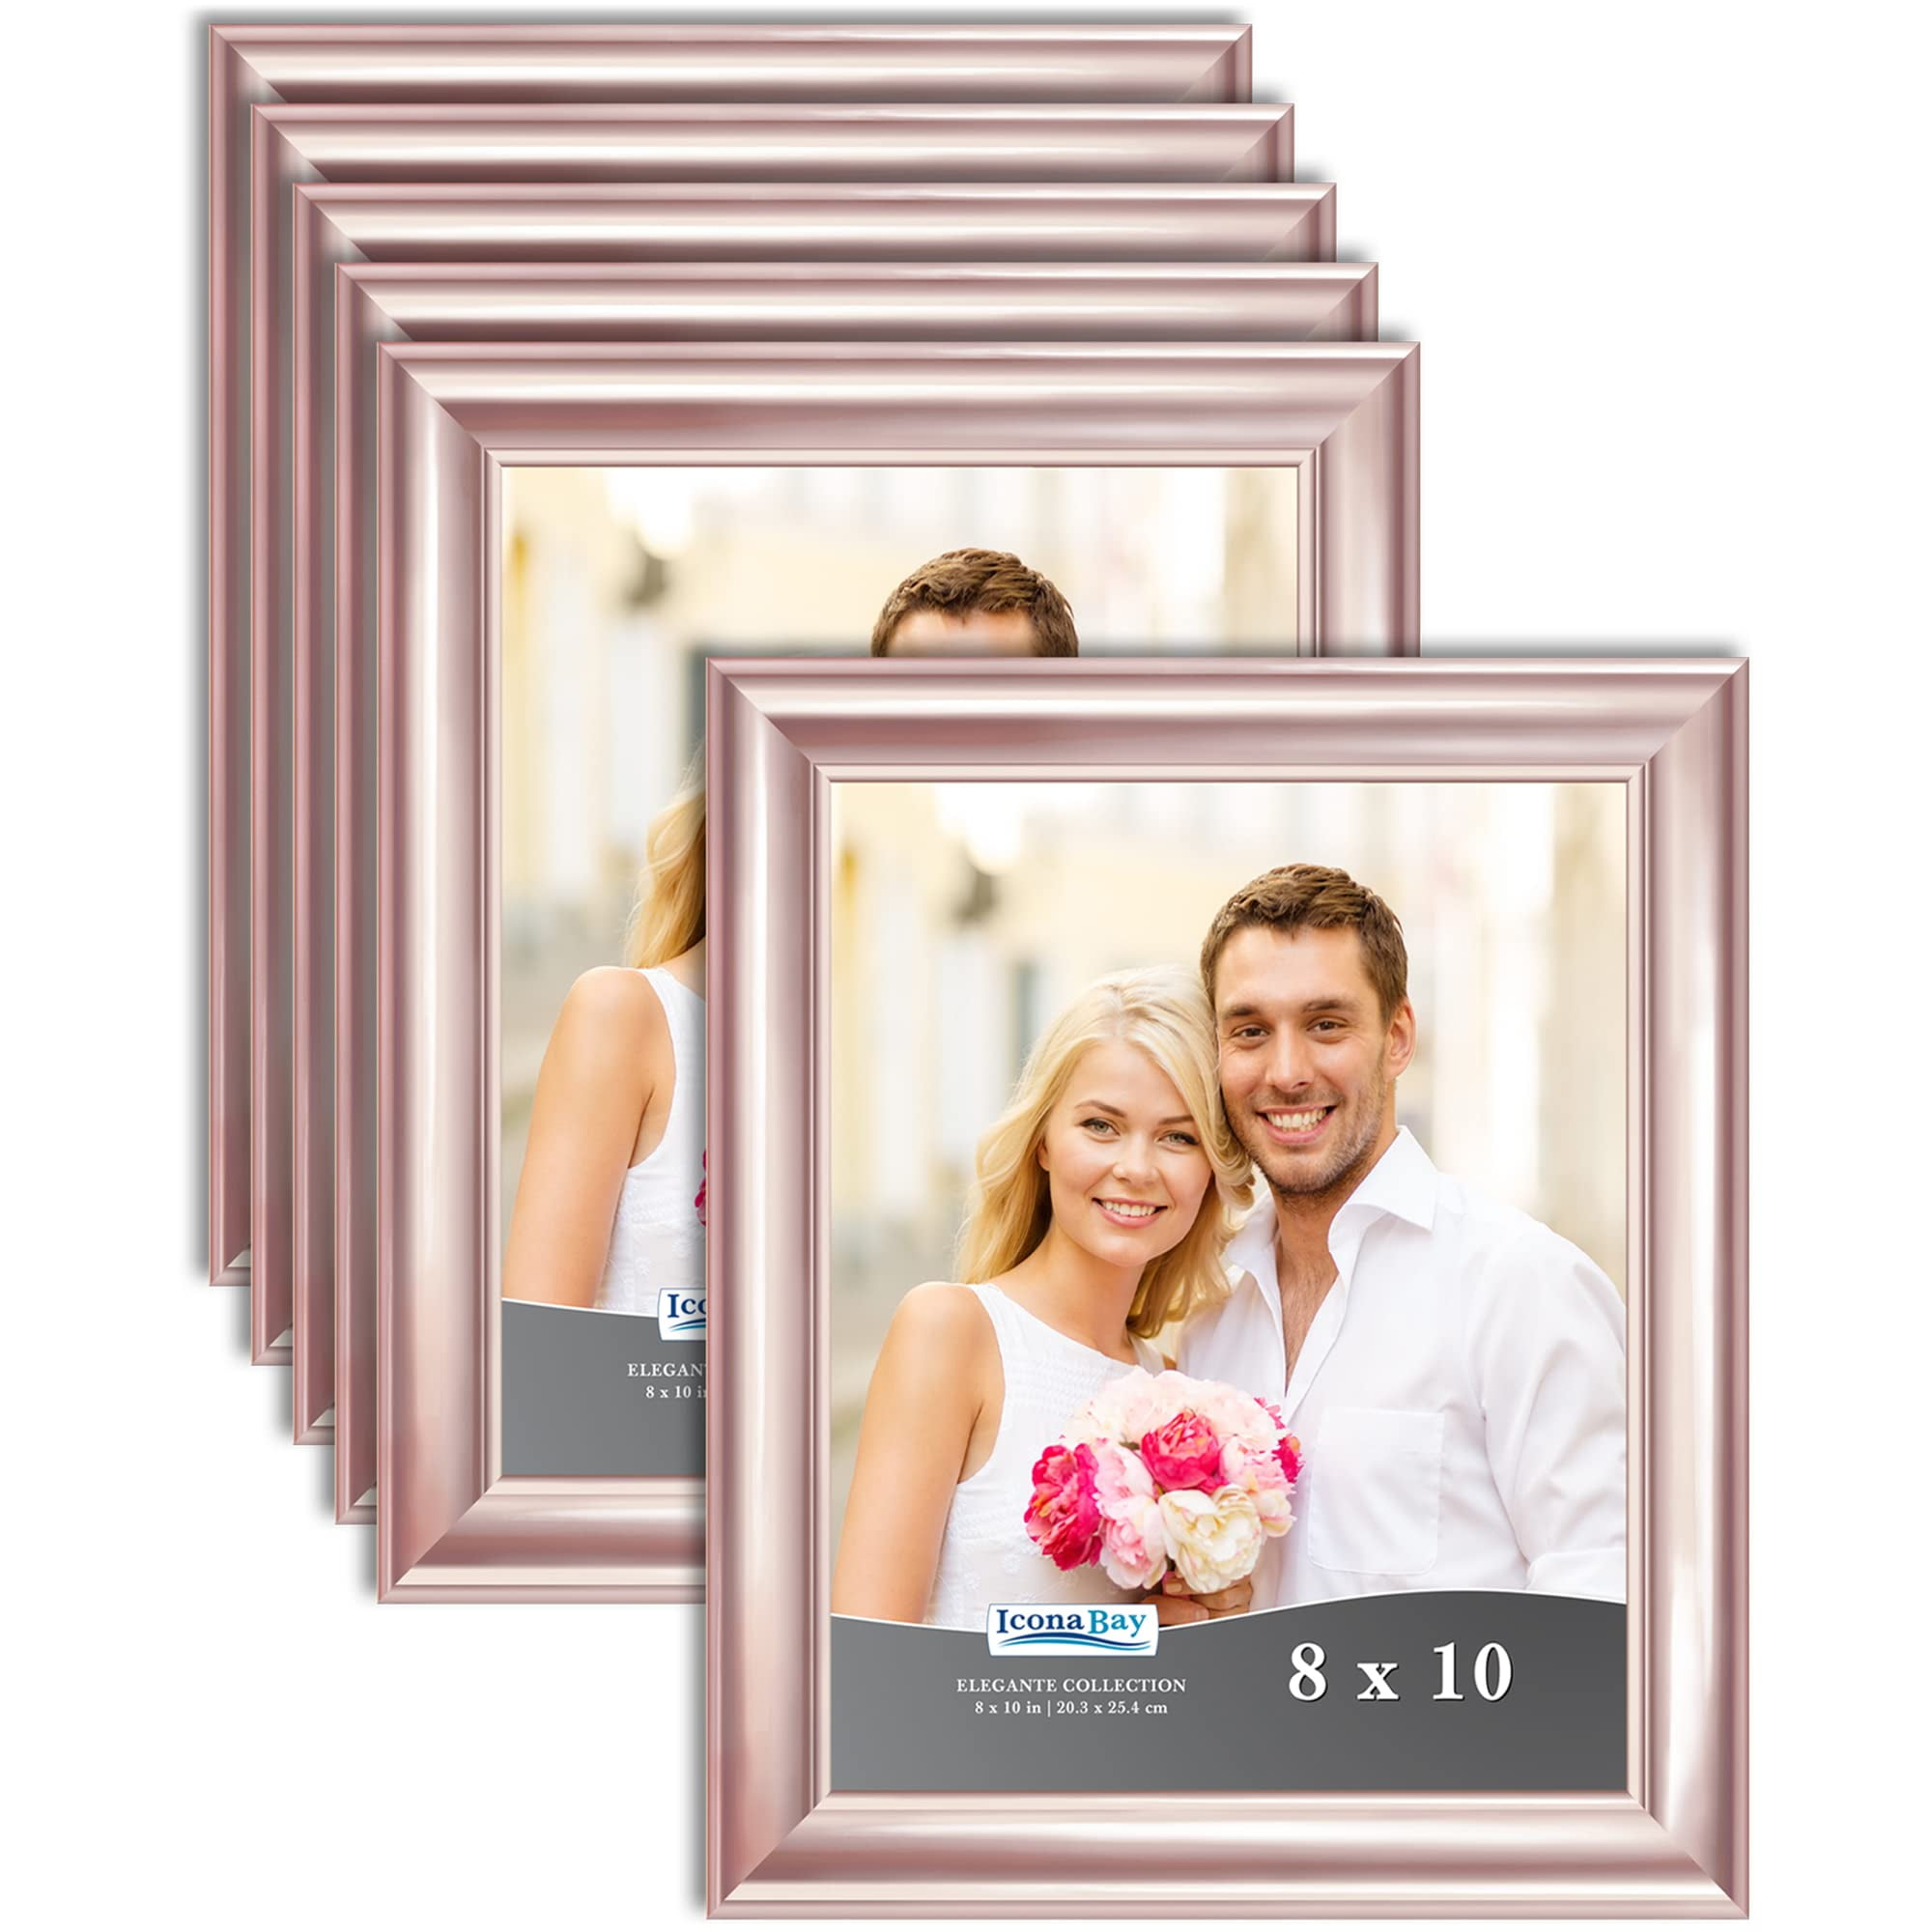 Contemporary Glam Photo Frames 4 x 6 Langdon House 4x6 Picture Frames Rose Gold, 6 Pack Wall Mount or Table Top Celebration Collection 